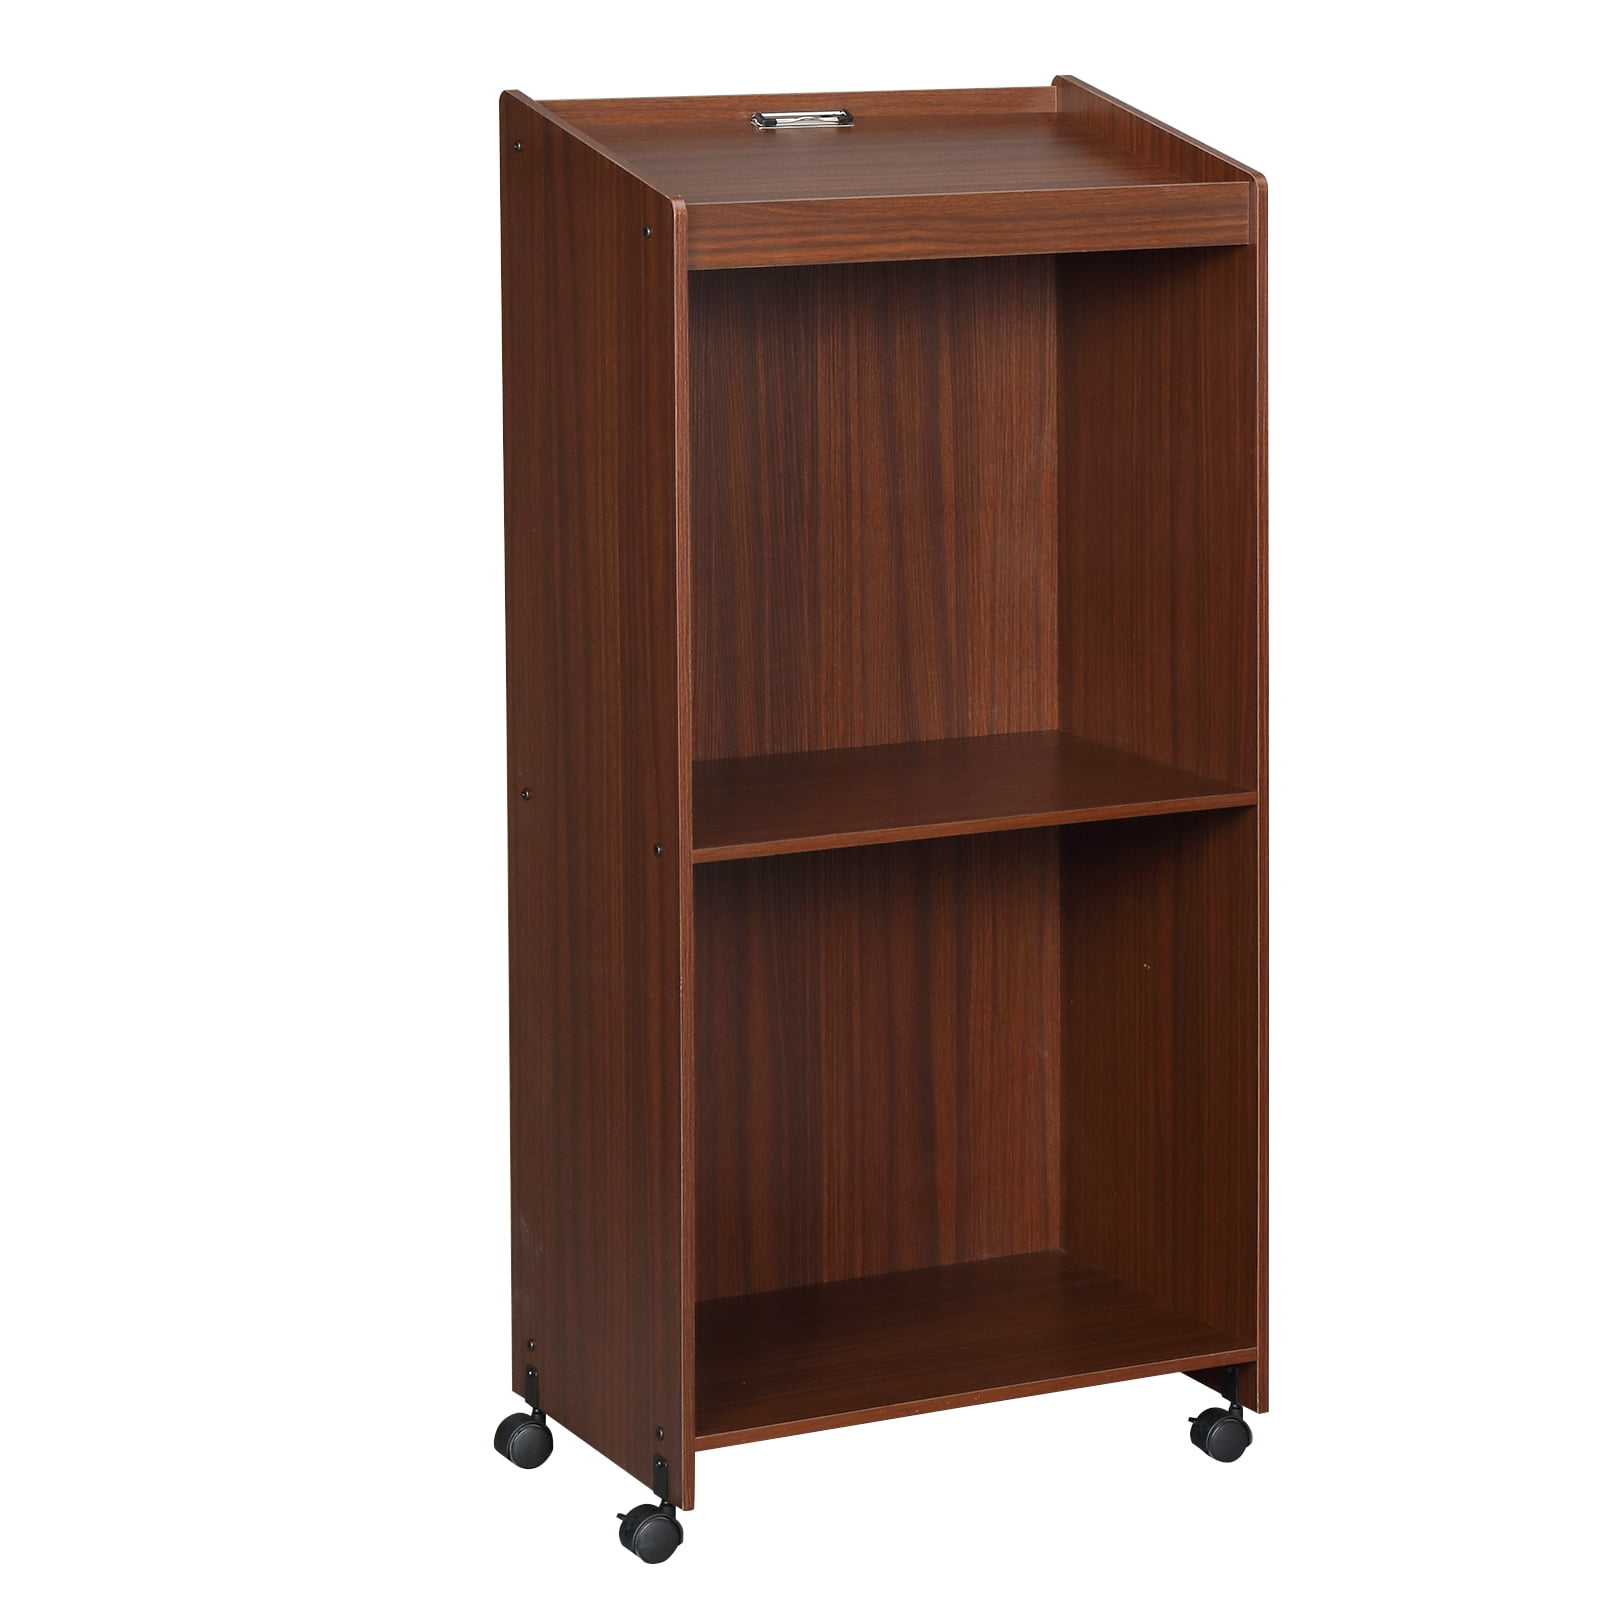 BBYT Lectern 43.25 Tall Podium/With drawer 2 Shelf Open Cabinet Wood Orator Floor Standing Pulpit 